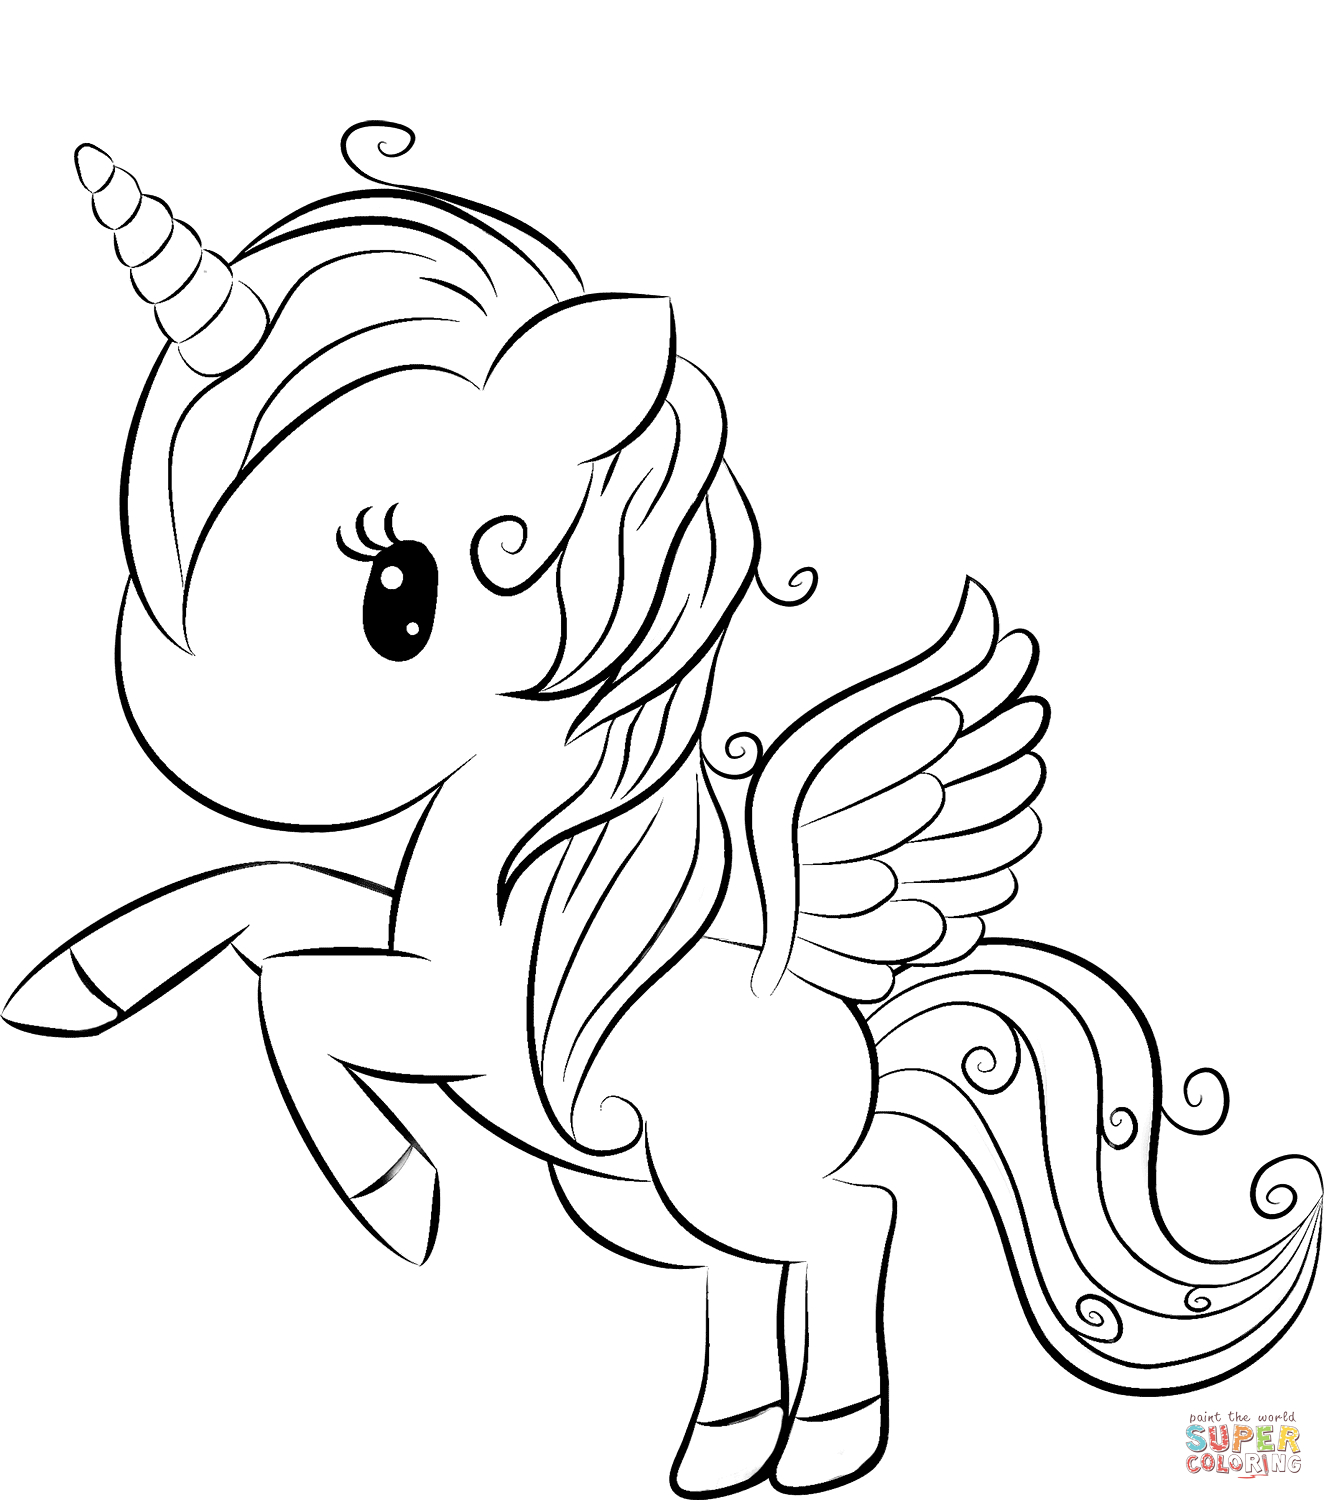 Unicorno Coloring Pages Cute Unicorn Coloring Page Free Printable Coloring Pages